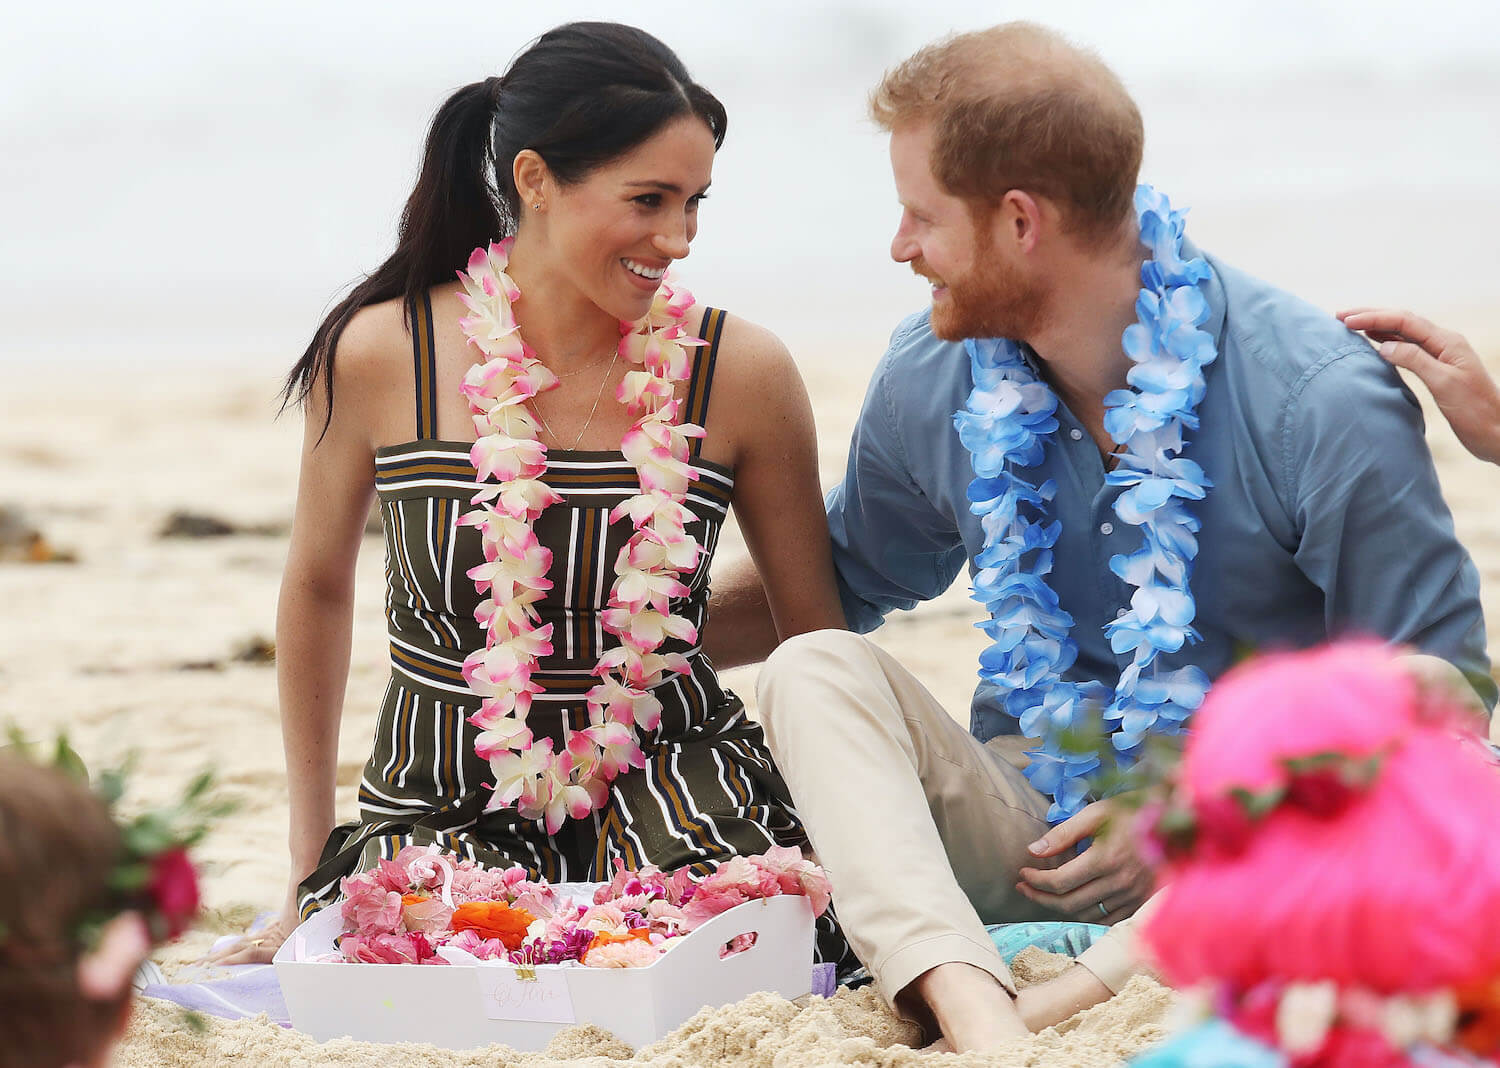 Prince Harry and Meghan Markle look at each other and smile while sitting on a beach wearing leis.